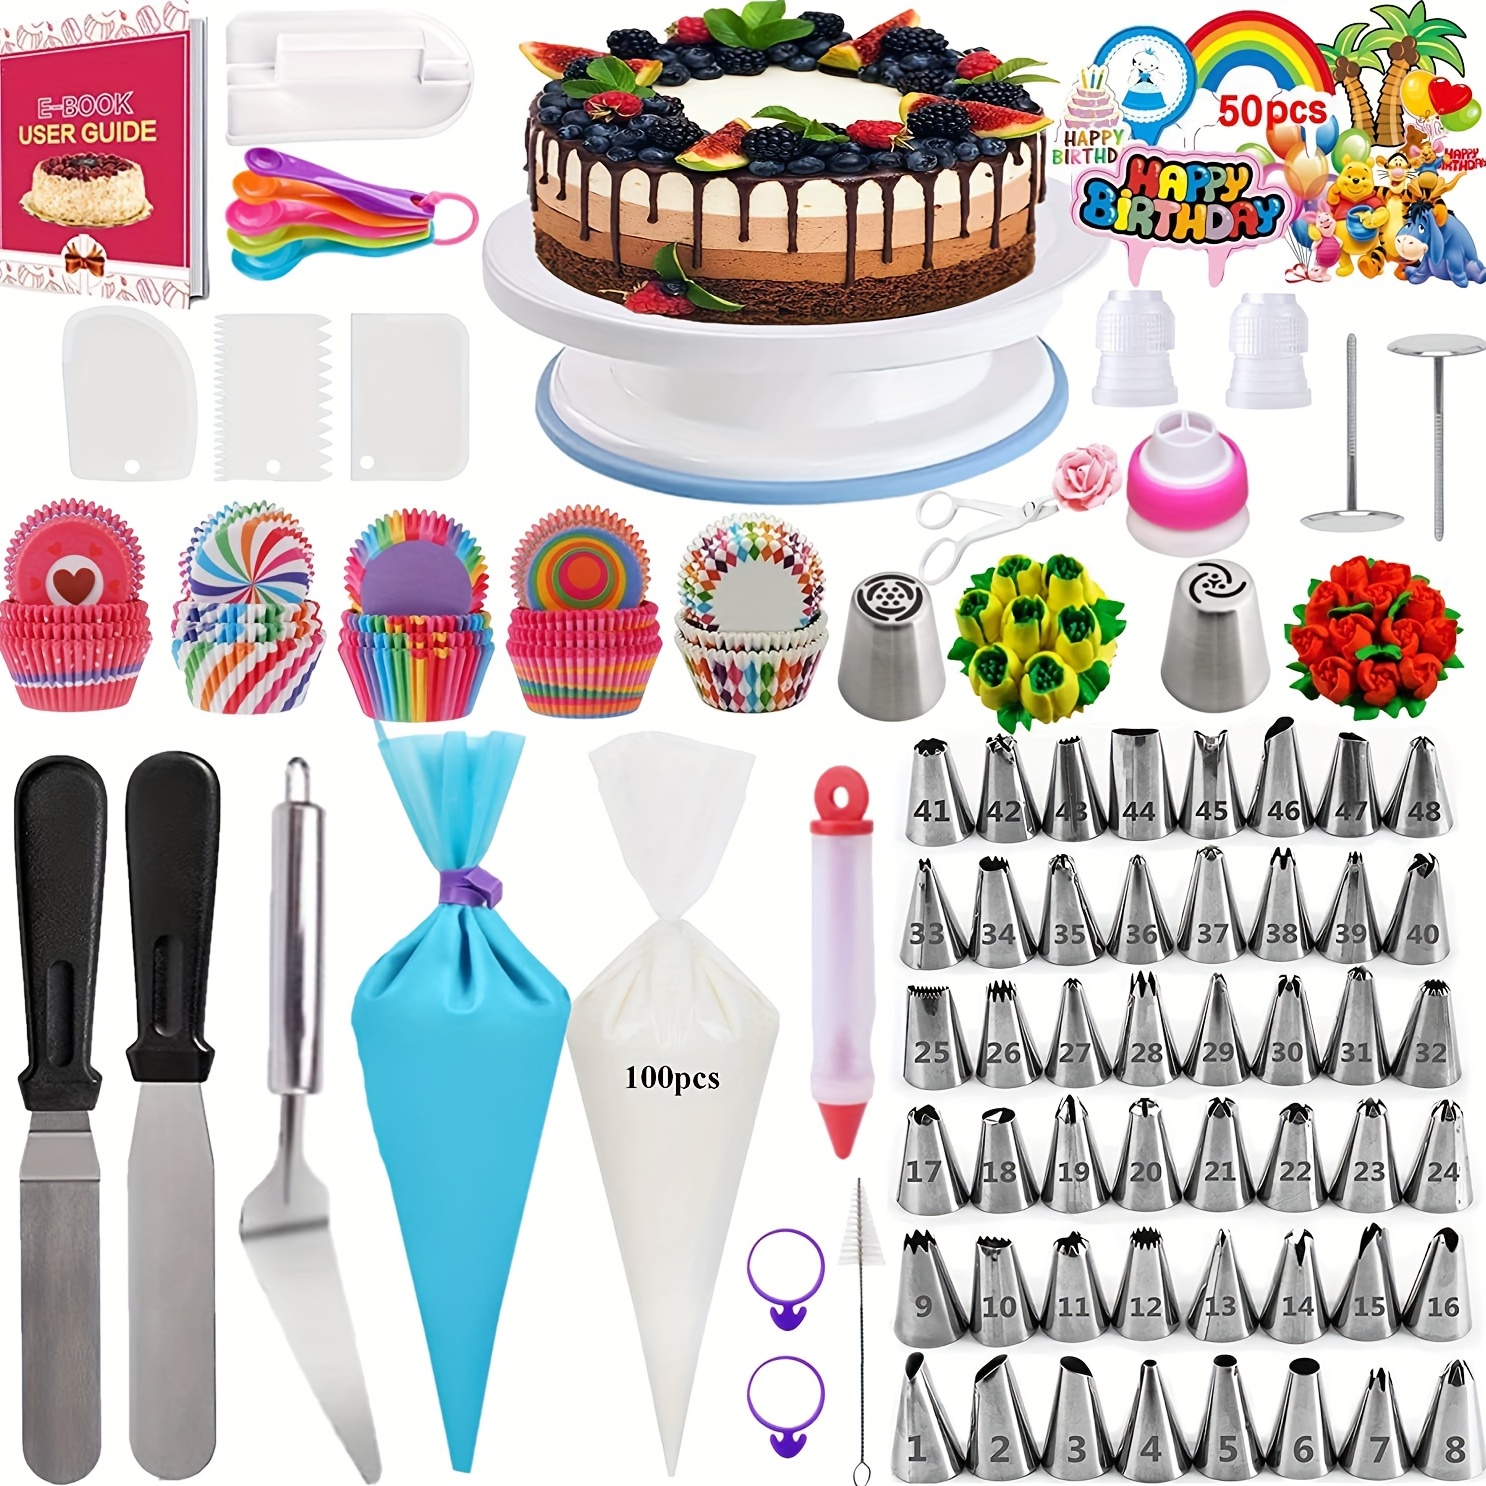 Cake Decorating Supplies | The Cake Decorating Co.